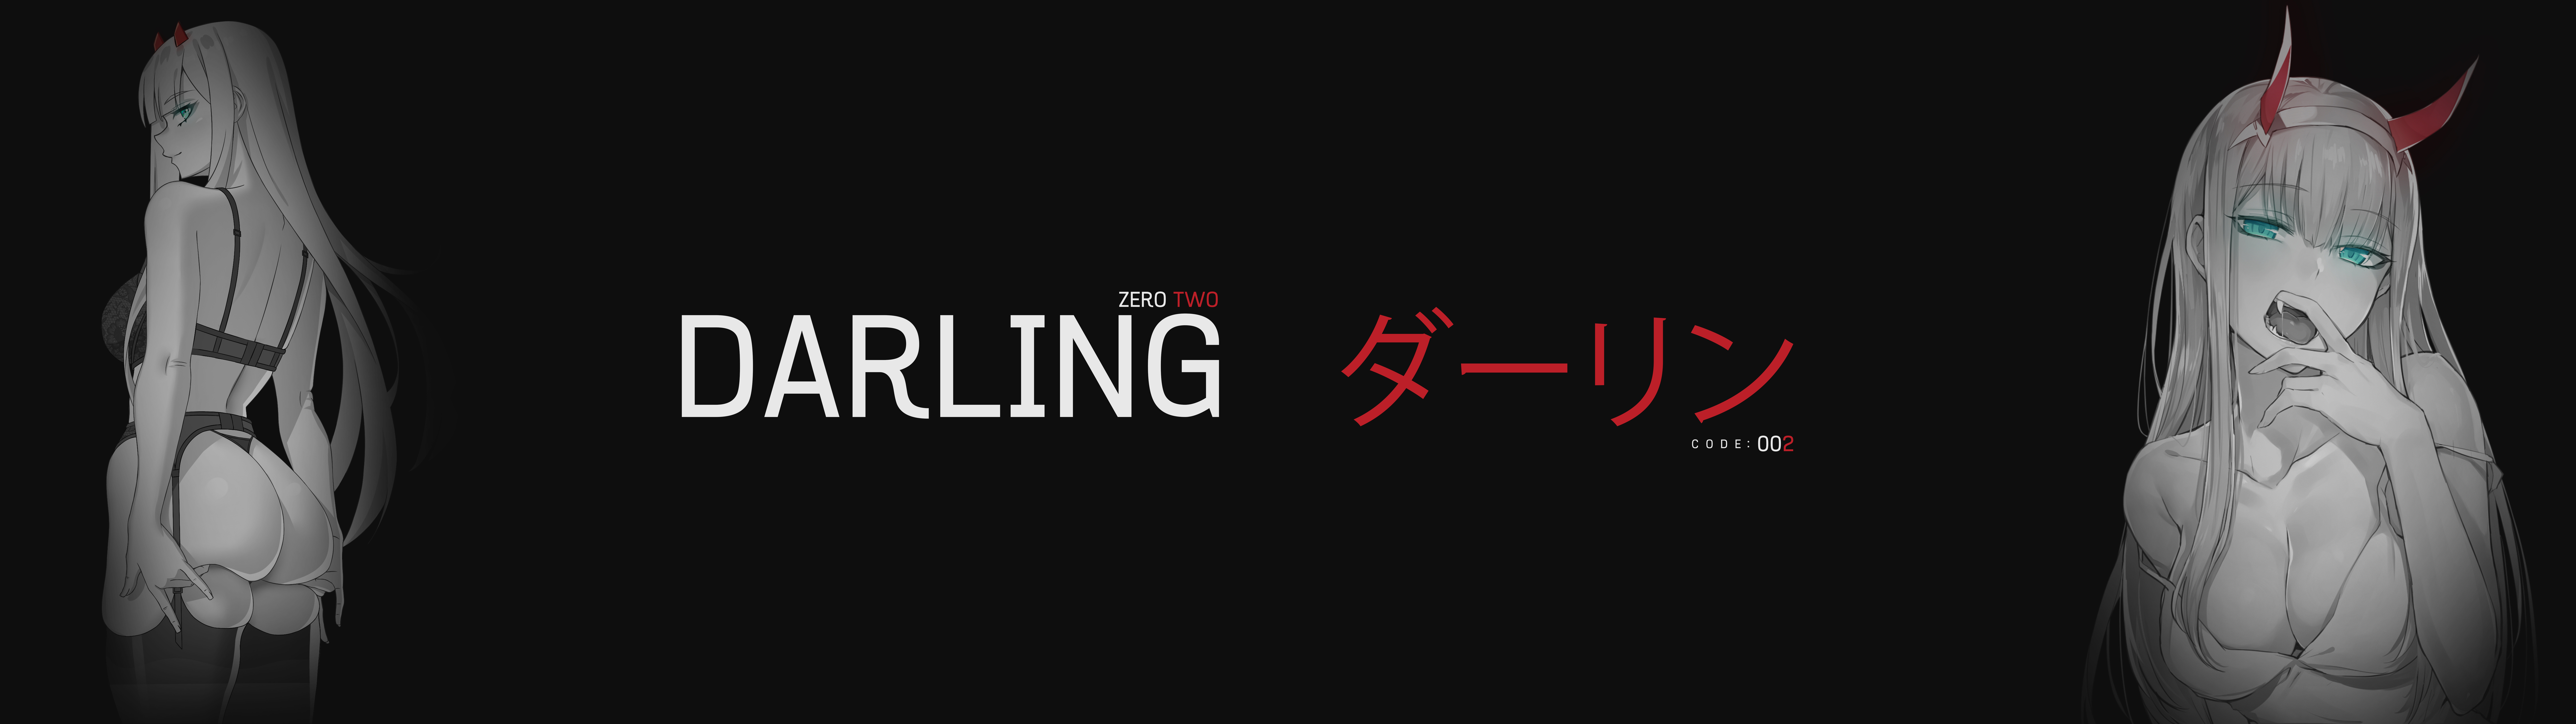 Anime 15360x4320 Zero Two (Darling in the FranXX) Darling in the FranXX booty scoop dual monitors ass grab anime girls horns black background simple background dark